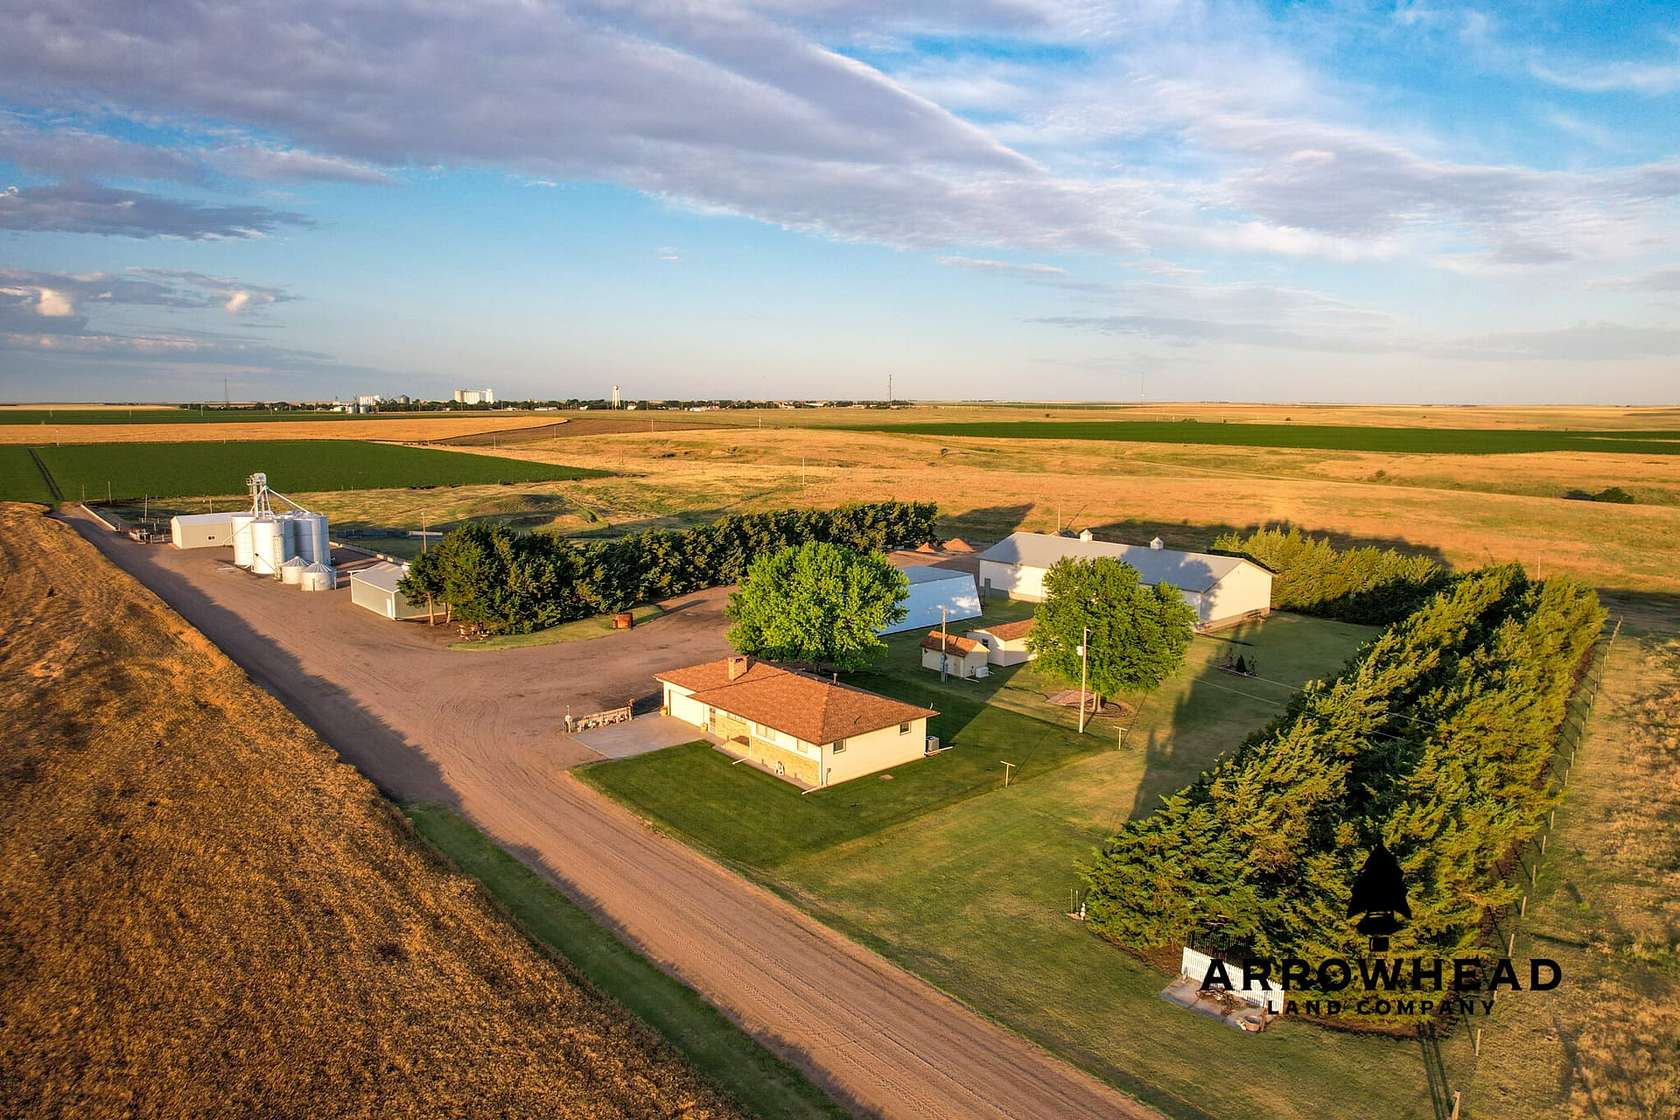 78 Acres of Land with Home for Sale in Grainfield, Kansas